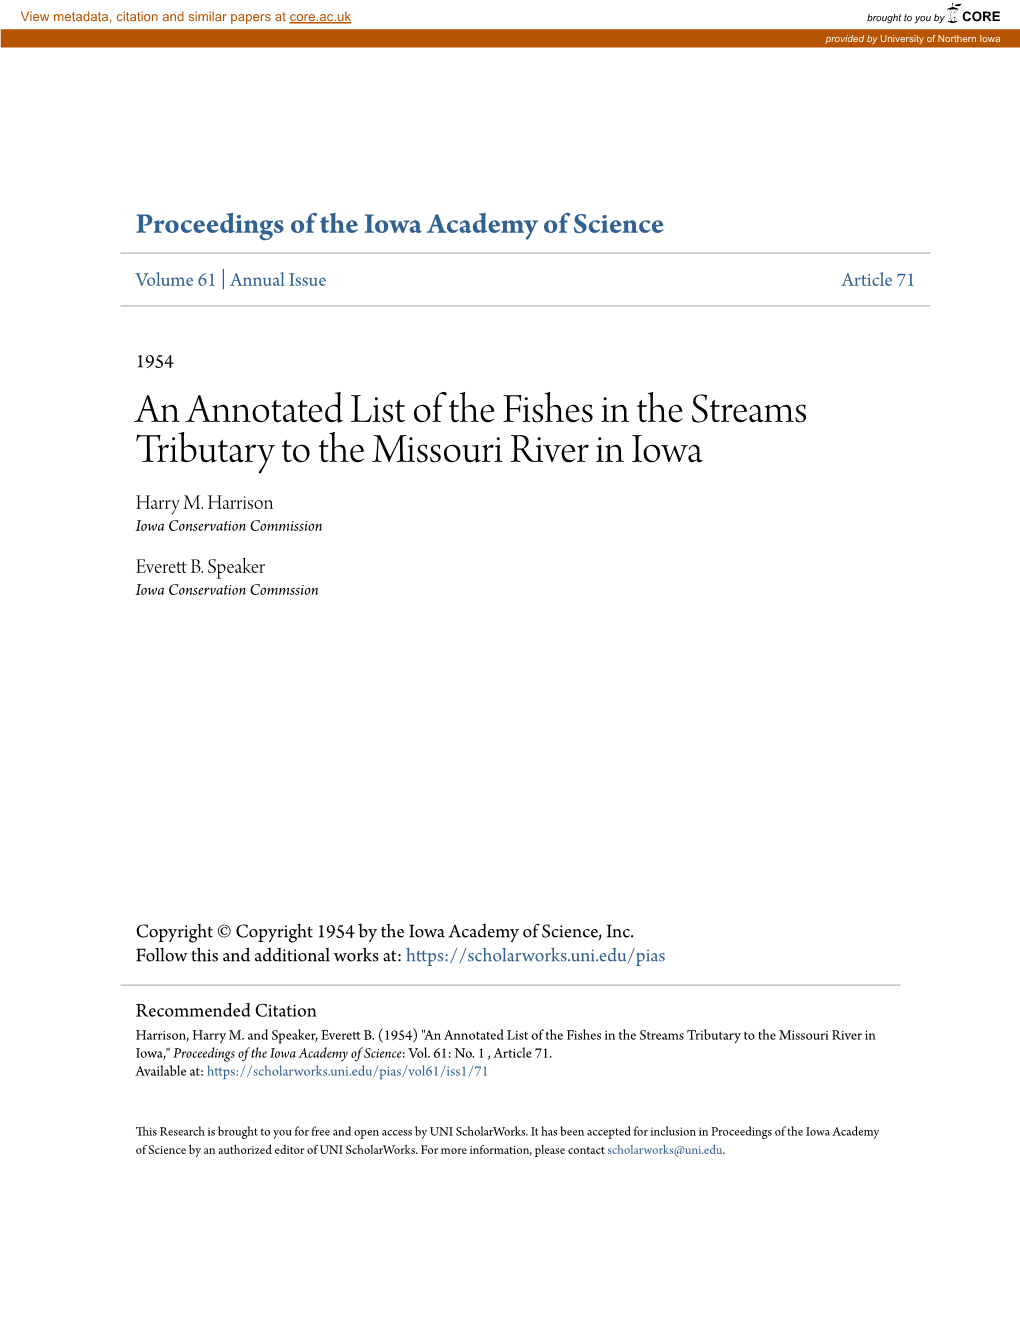 An Annotated List of the Fishes in the Streams Tributary to the Missouri River in Iowa Harry M